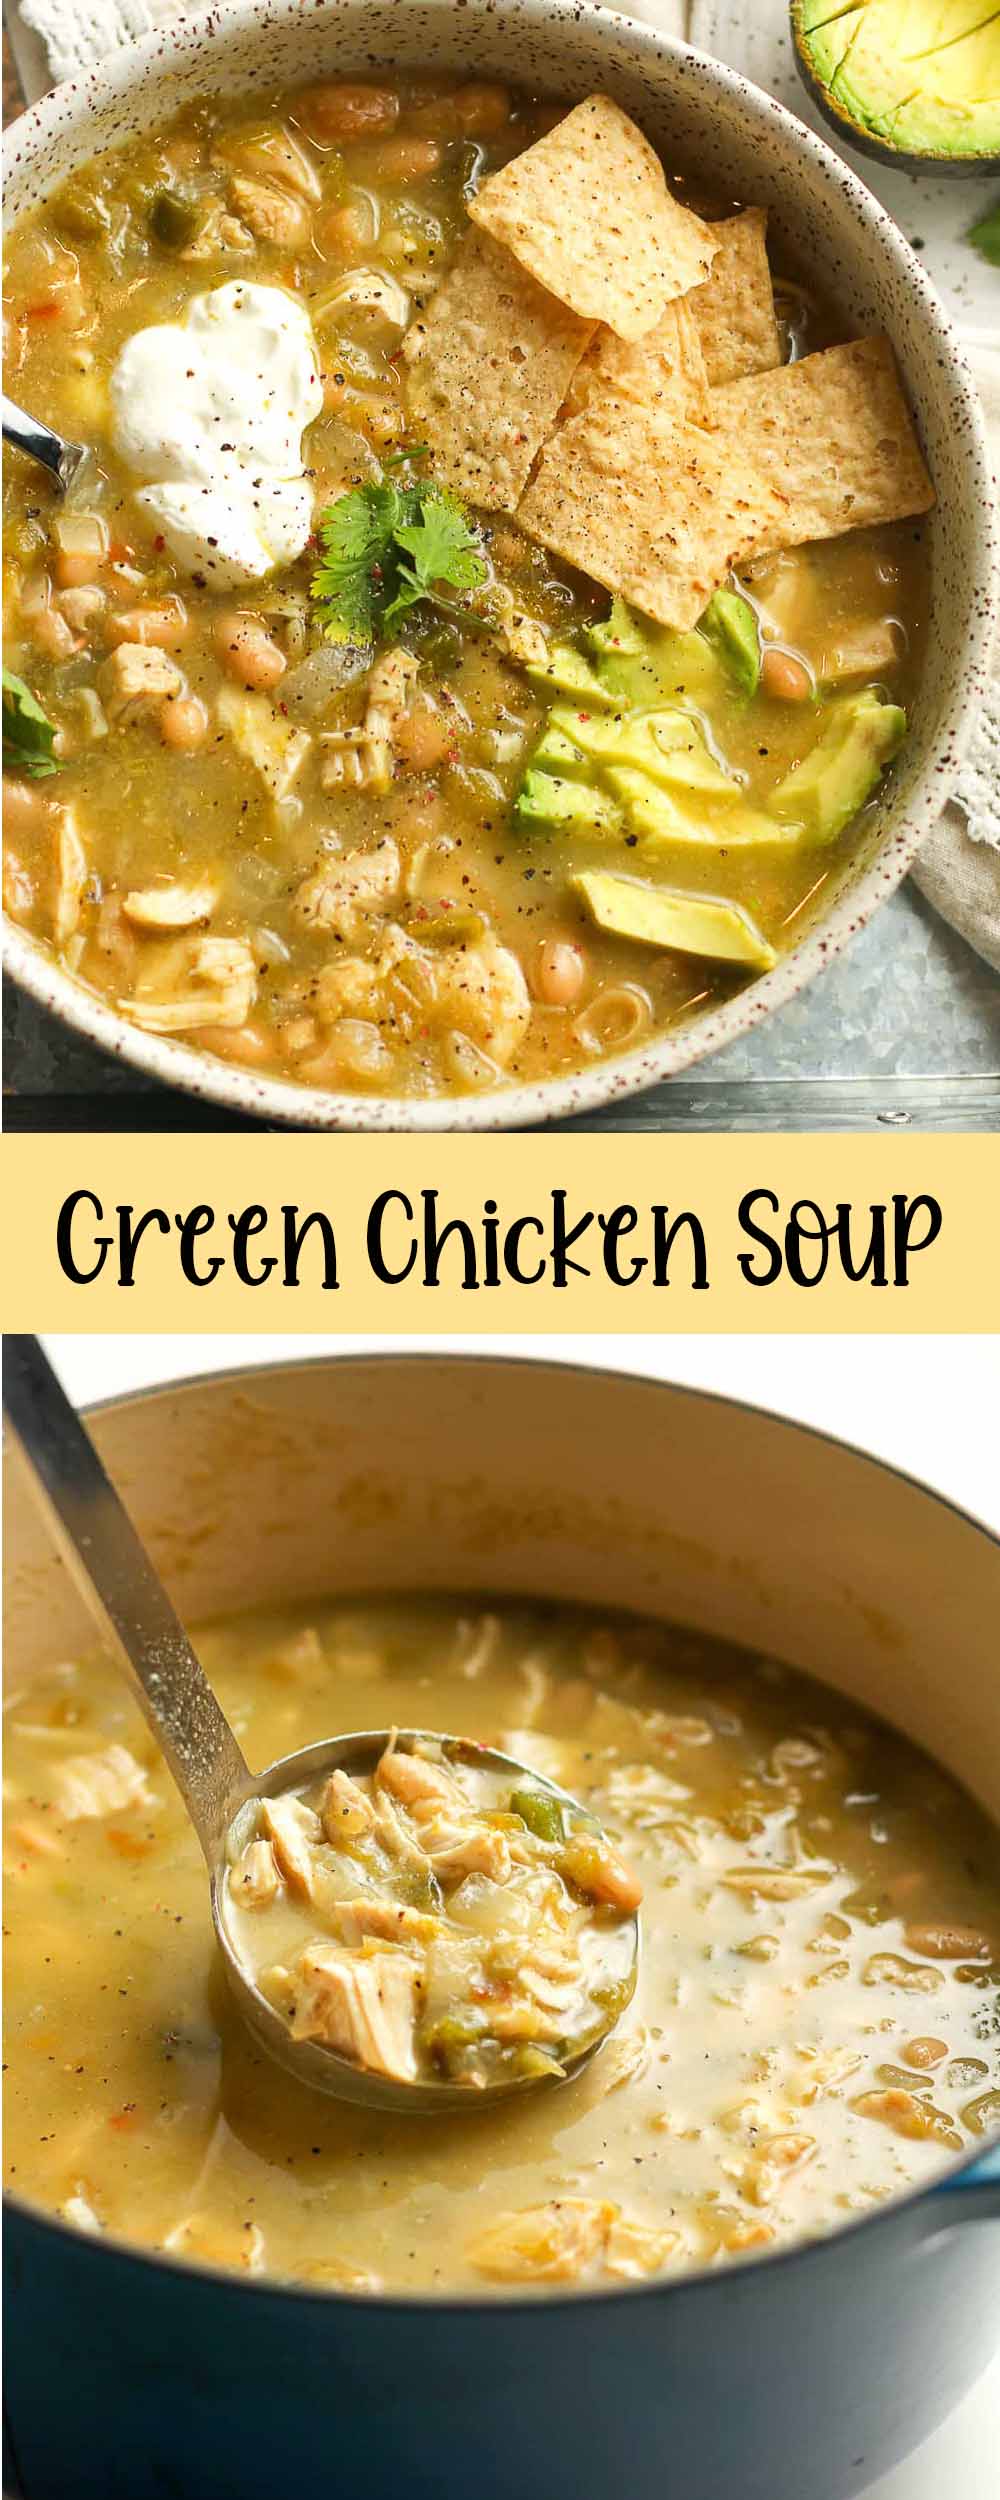 Two photos of Green Chicken Soup.